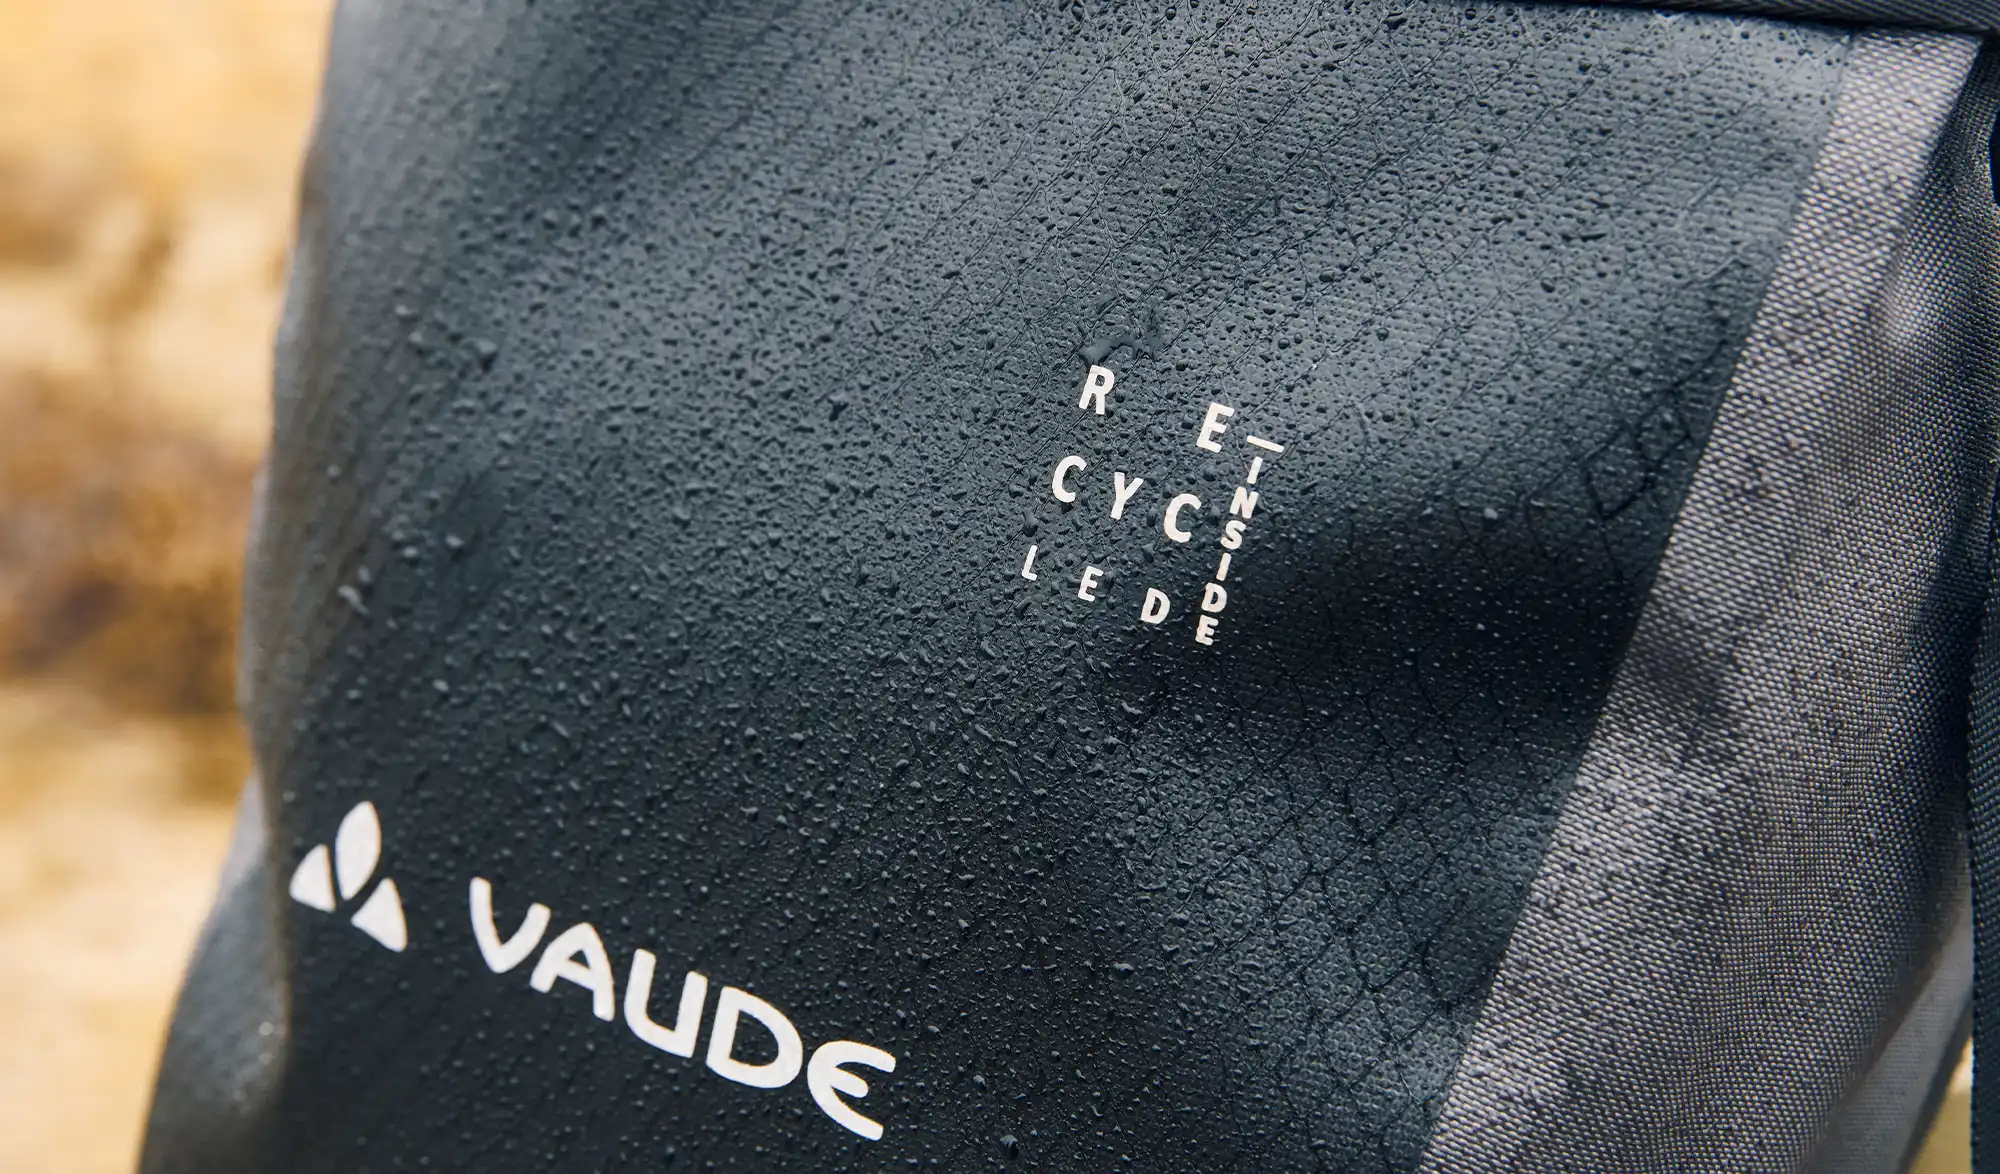 VAUDE collection FW22